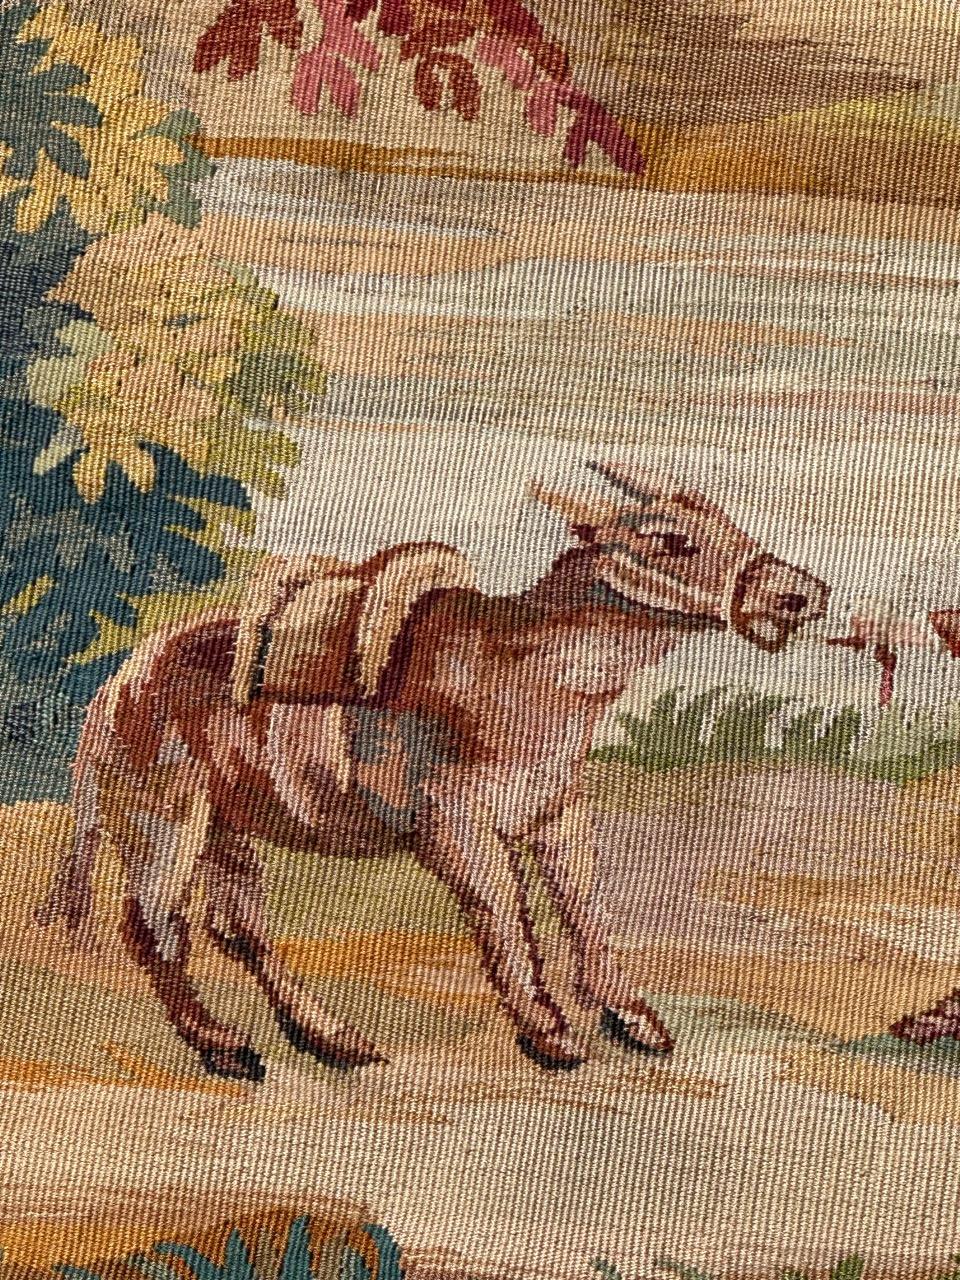 Bobyrug’s Wonderful Fine Antique French Aubusson Tapestry 3